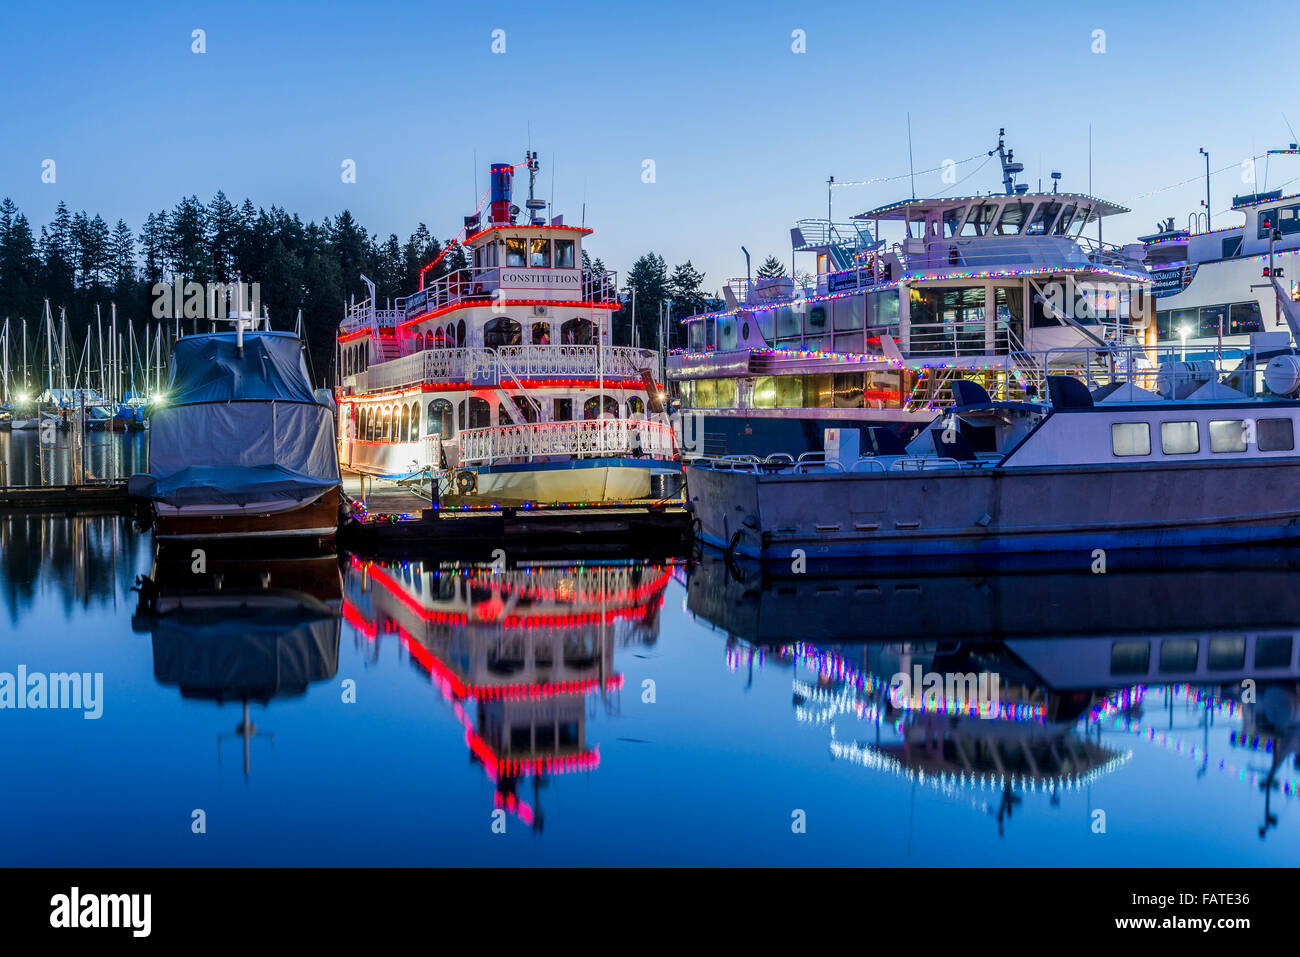 Christmas lights on tour boats,  Coal Harbour, Vancouver, British Columbia, Canada Stock Photo